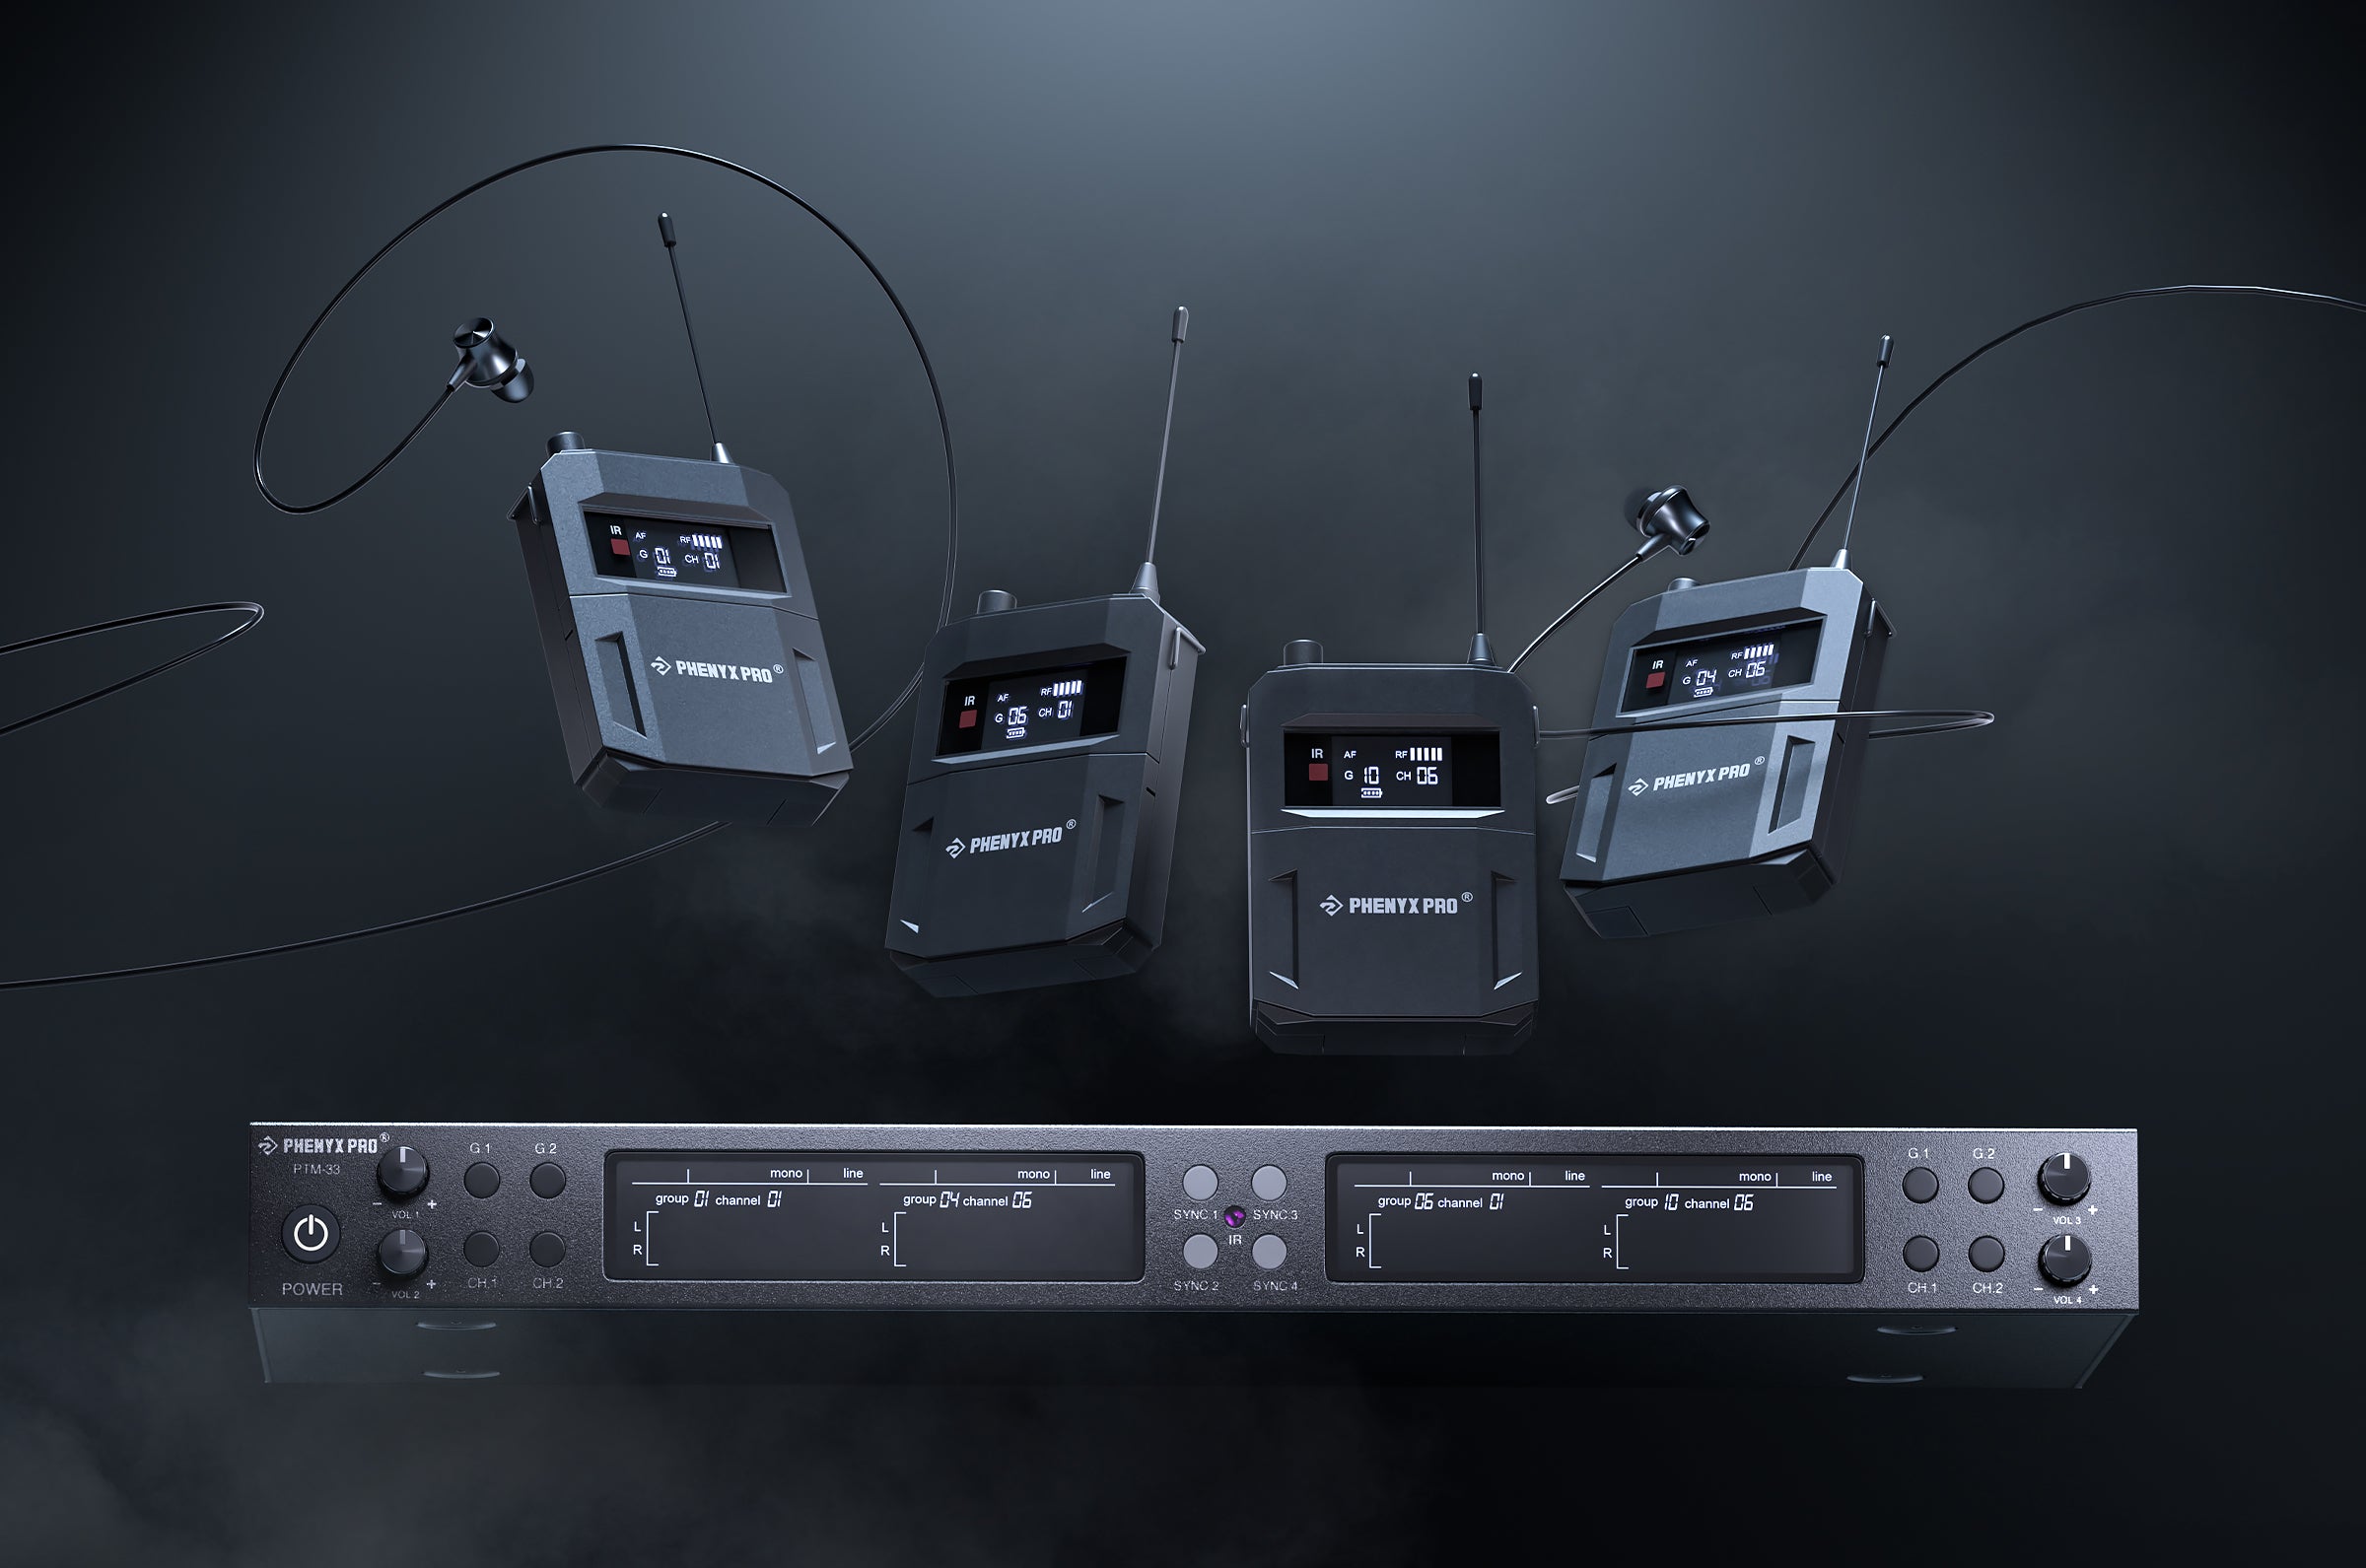 New PTM-33 Mono In-Ear Monitor System Has Arrived